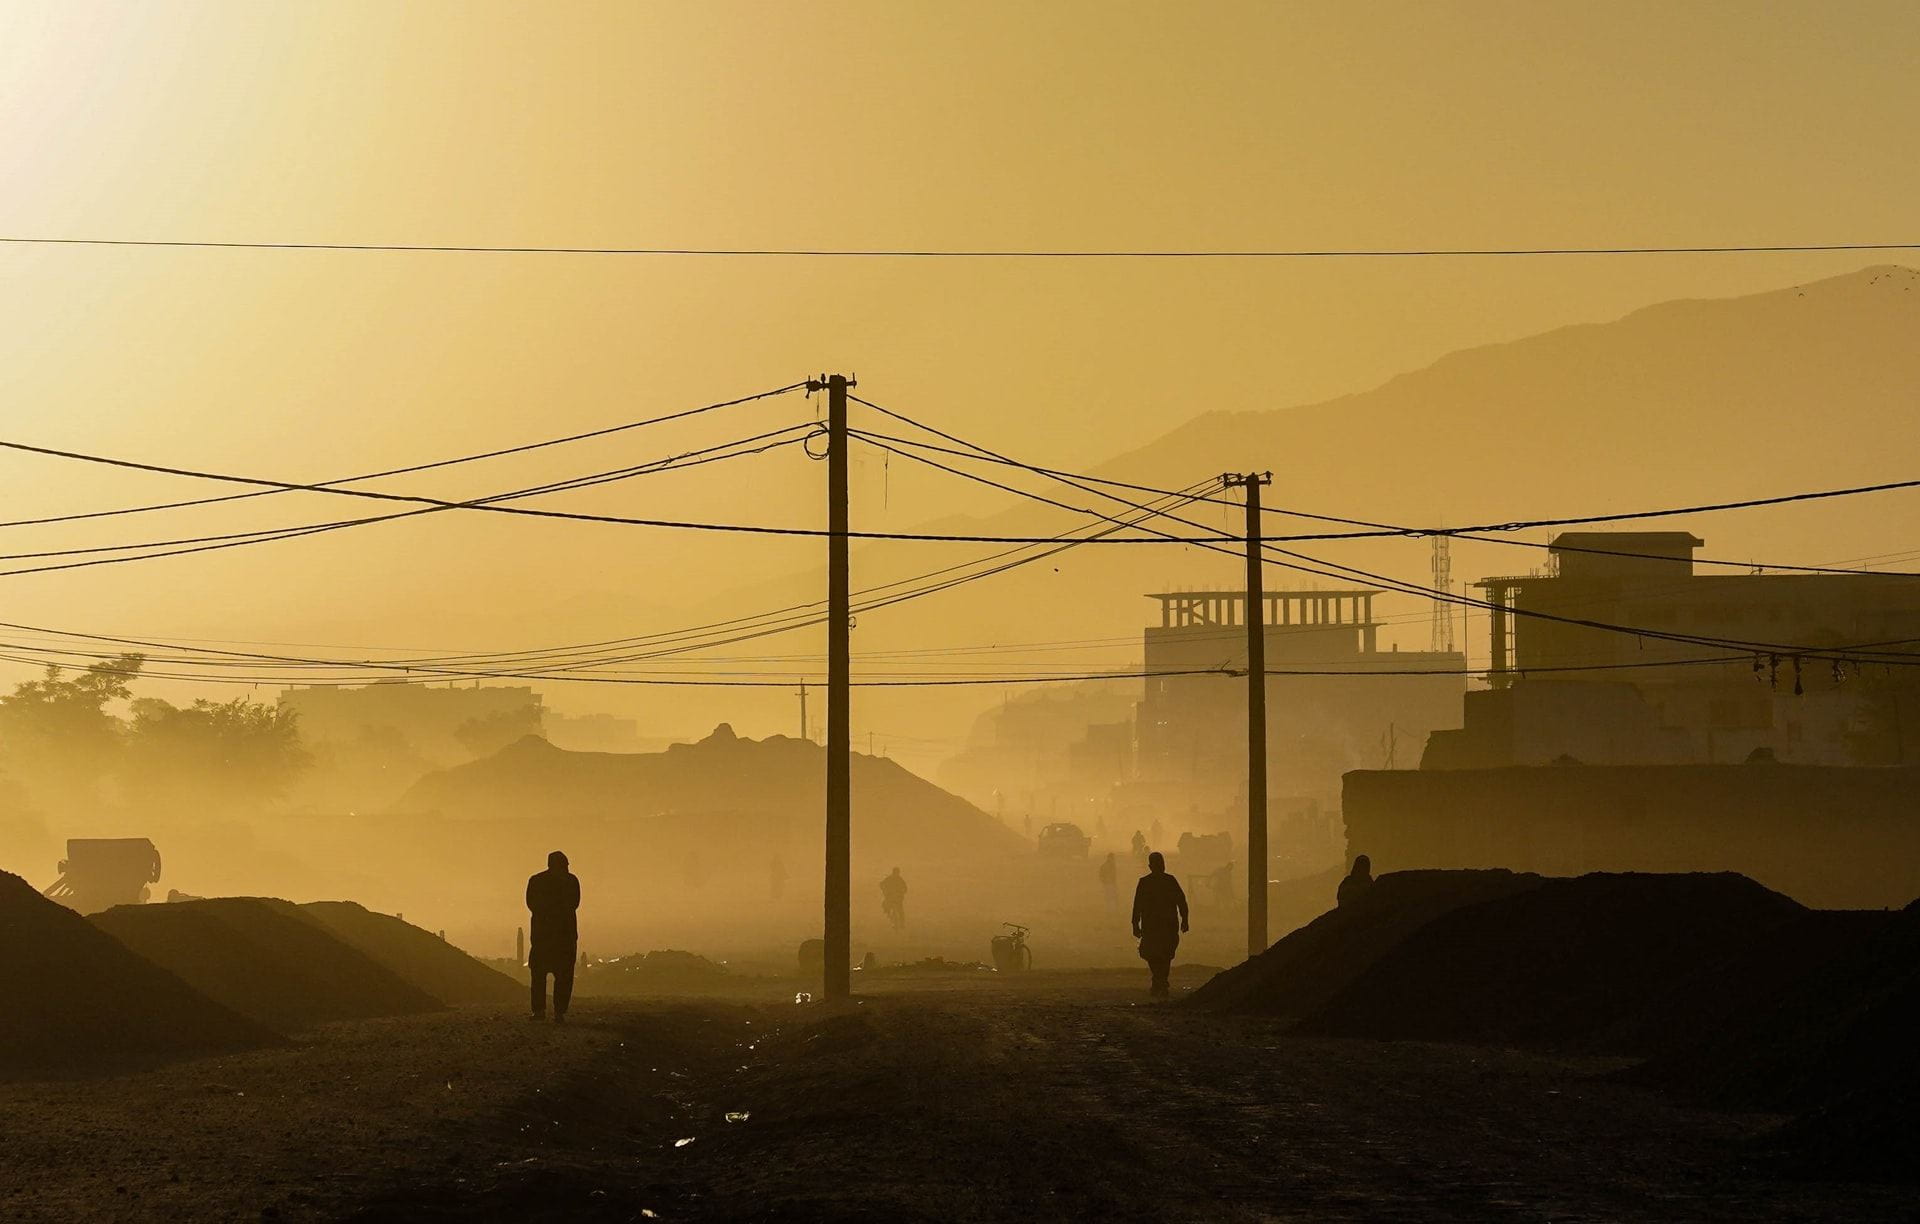 Dimly lit scene of a morning in Kabul, Afghanistan. Two silhouettes appear against the background.